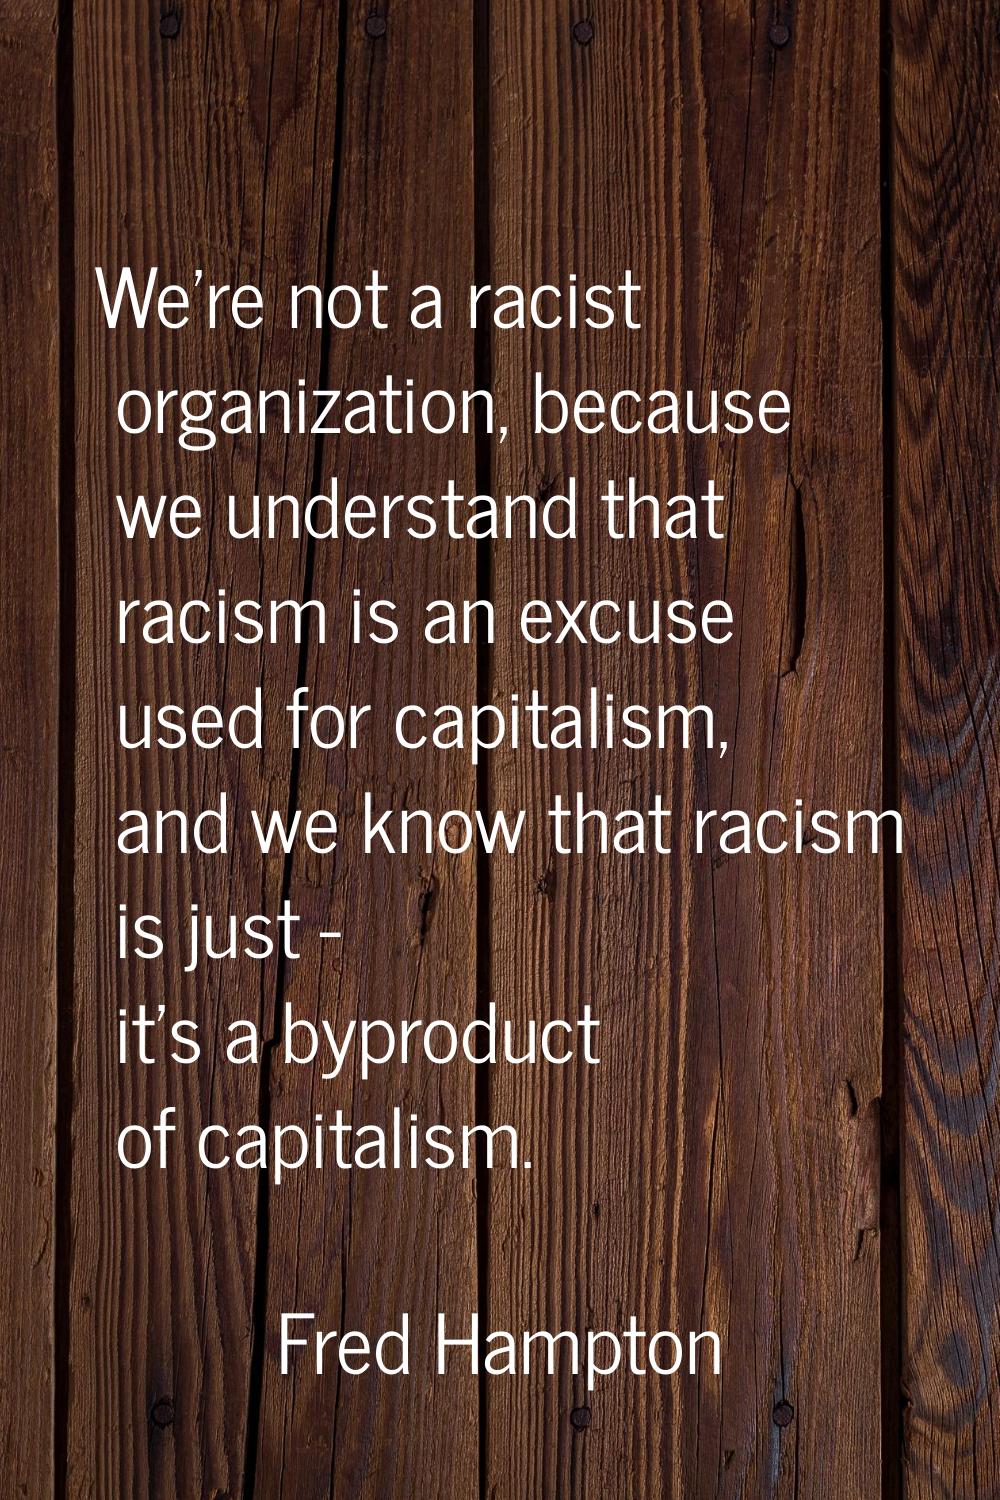 We're not a racist organization, because we understand that racism is an excuse used for capitalism